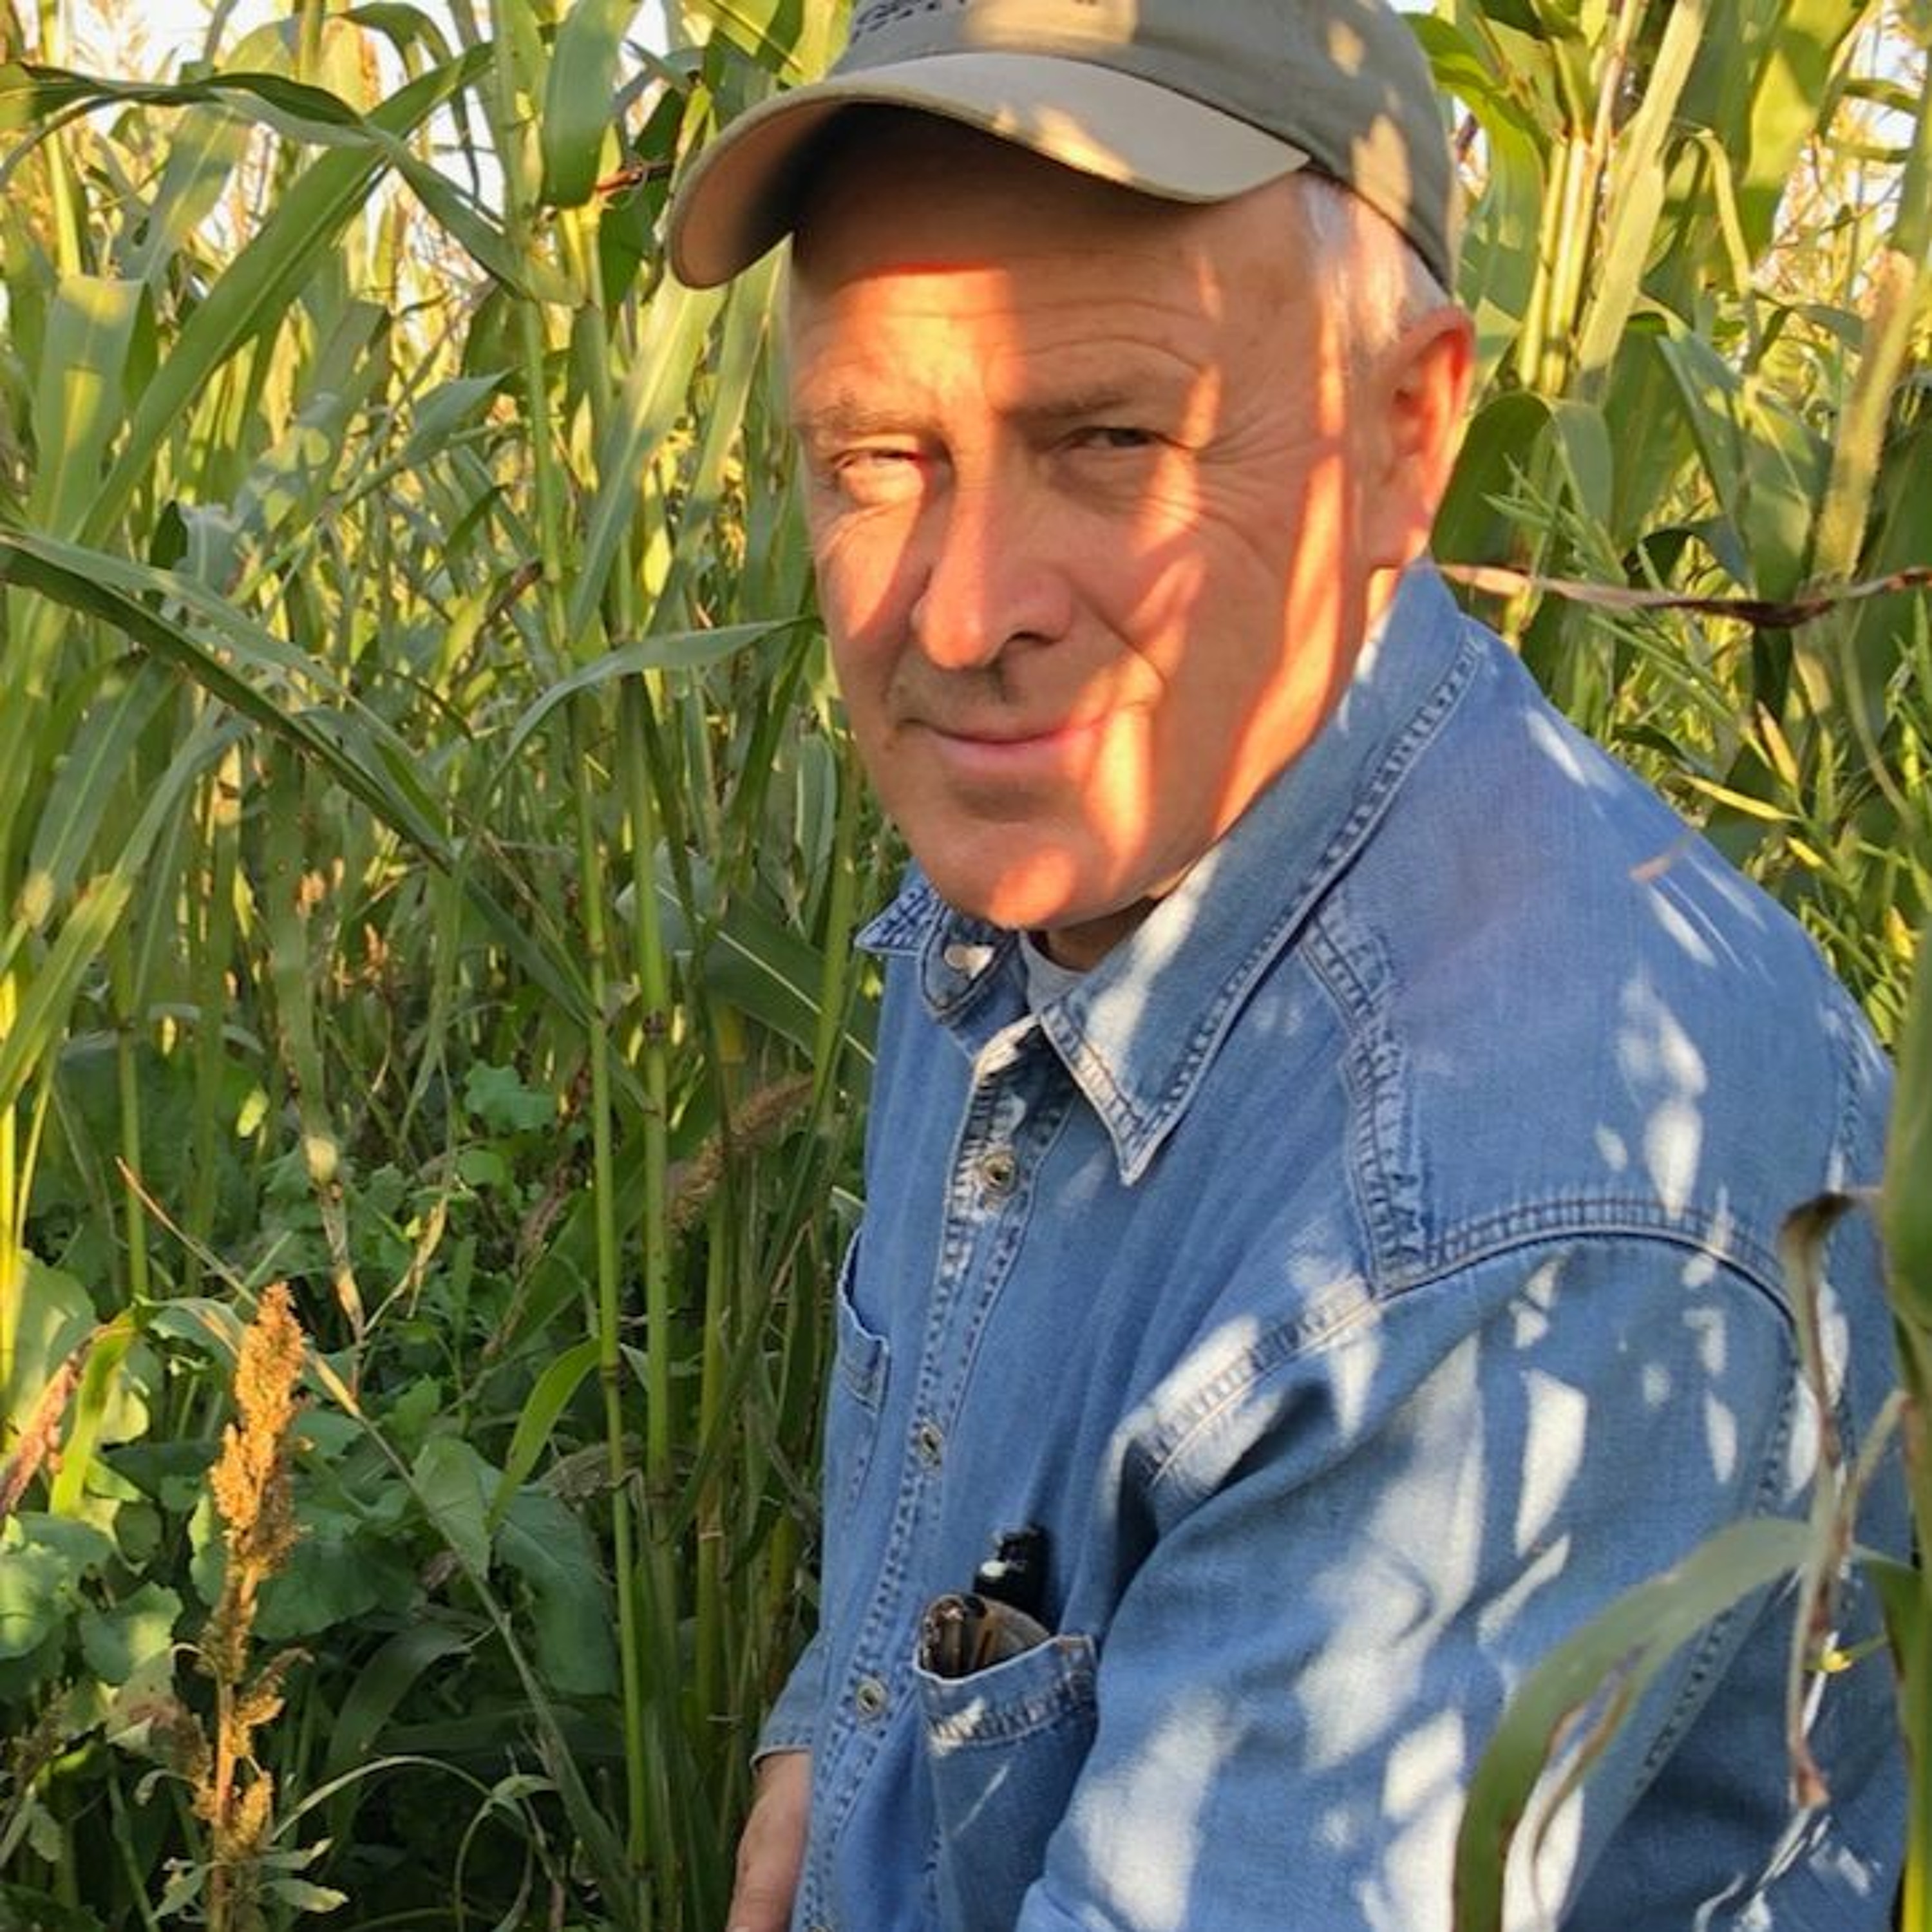 101 AgEmerge Podcast With Jay Fuhrer, Conservationist cover art